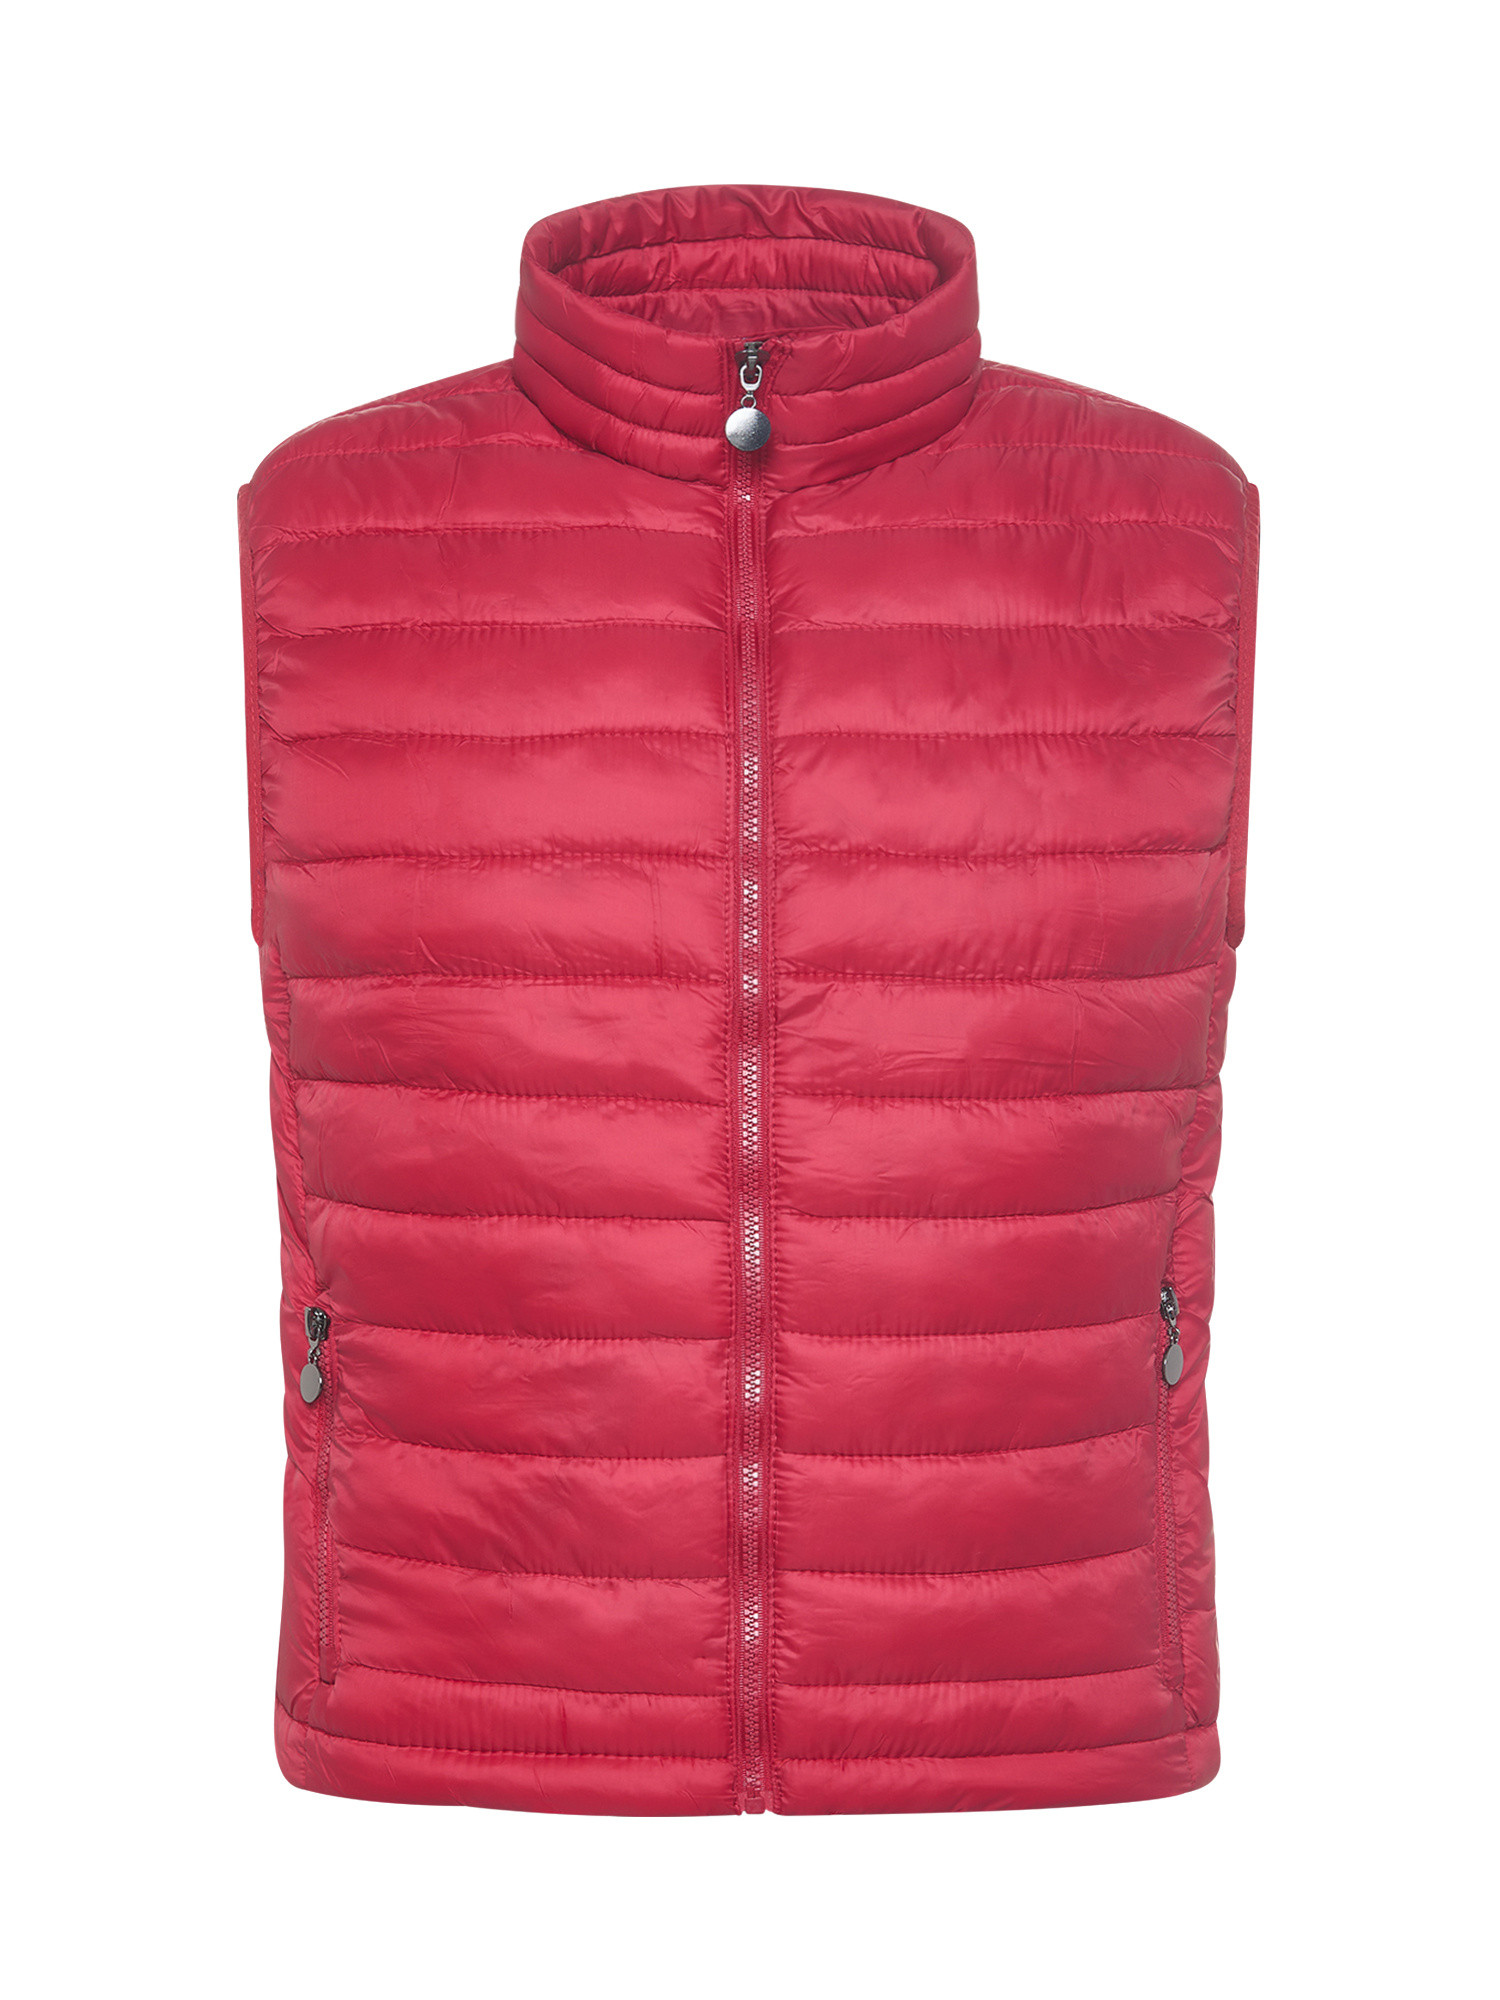 JCT - Quilted sleeveless down jacket, Red, large image number 0